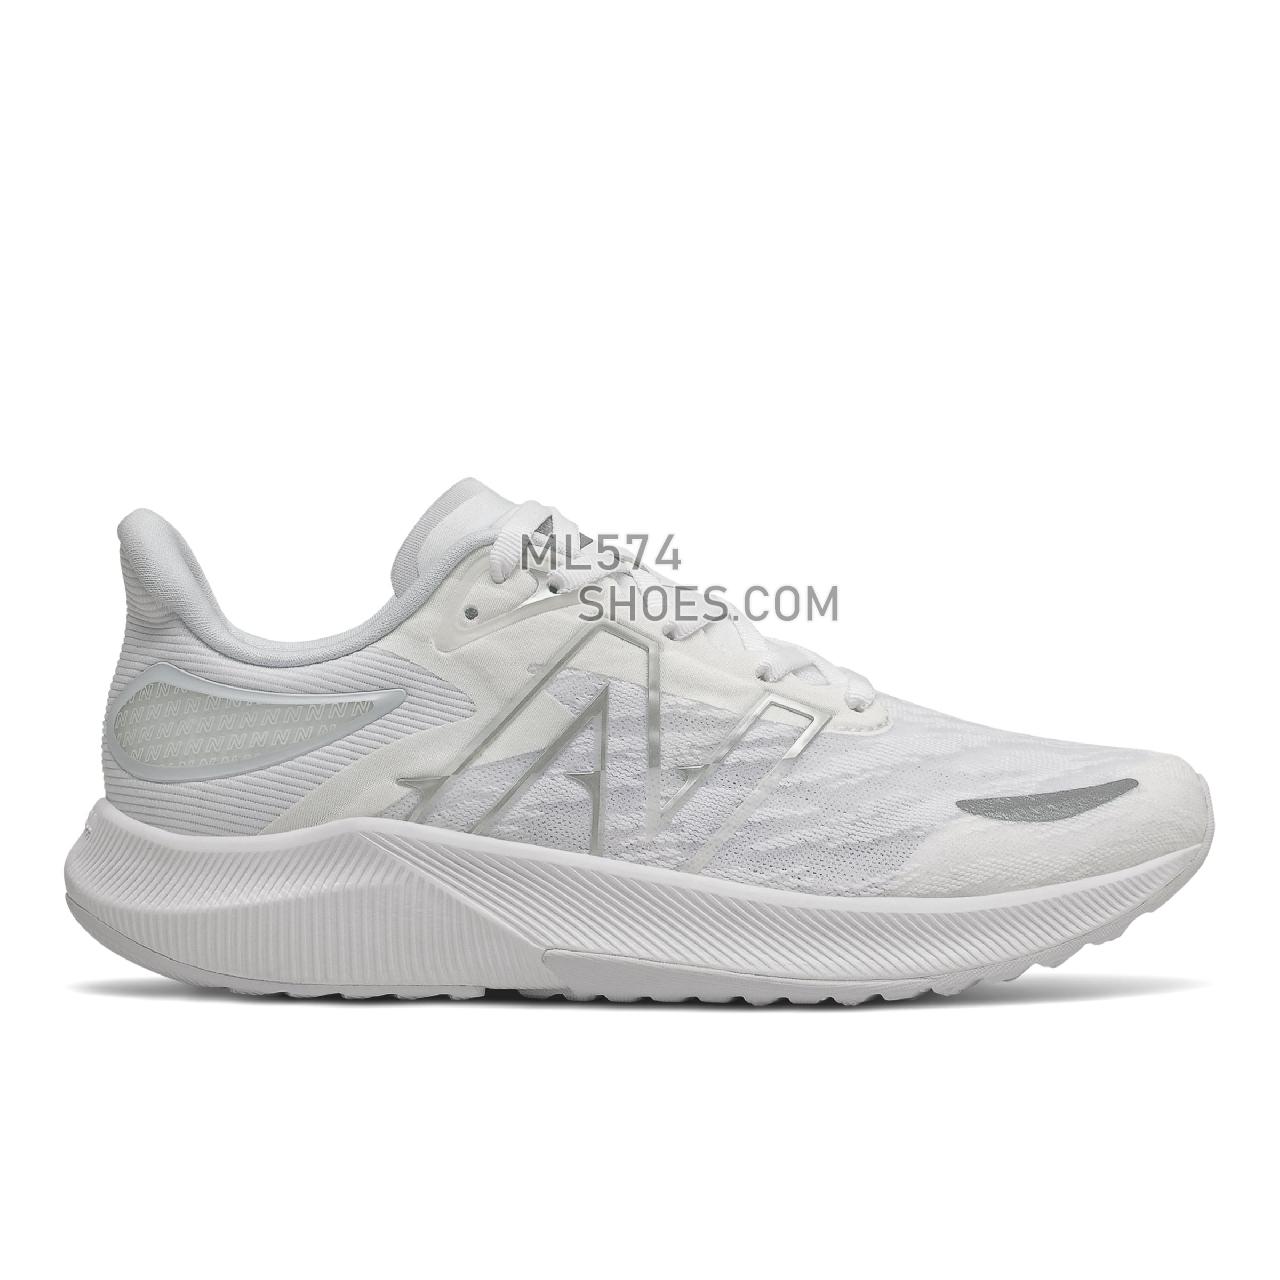 New Balance FuelCell Propel v3 - Women's Neutral Running - White with Arctic Fox - WFCPRLW3